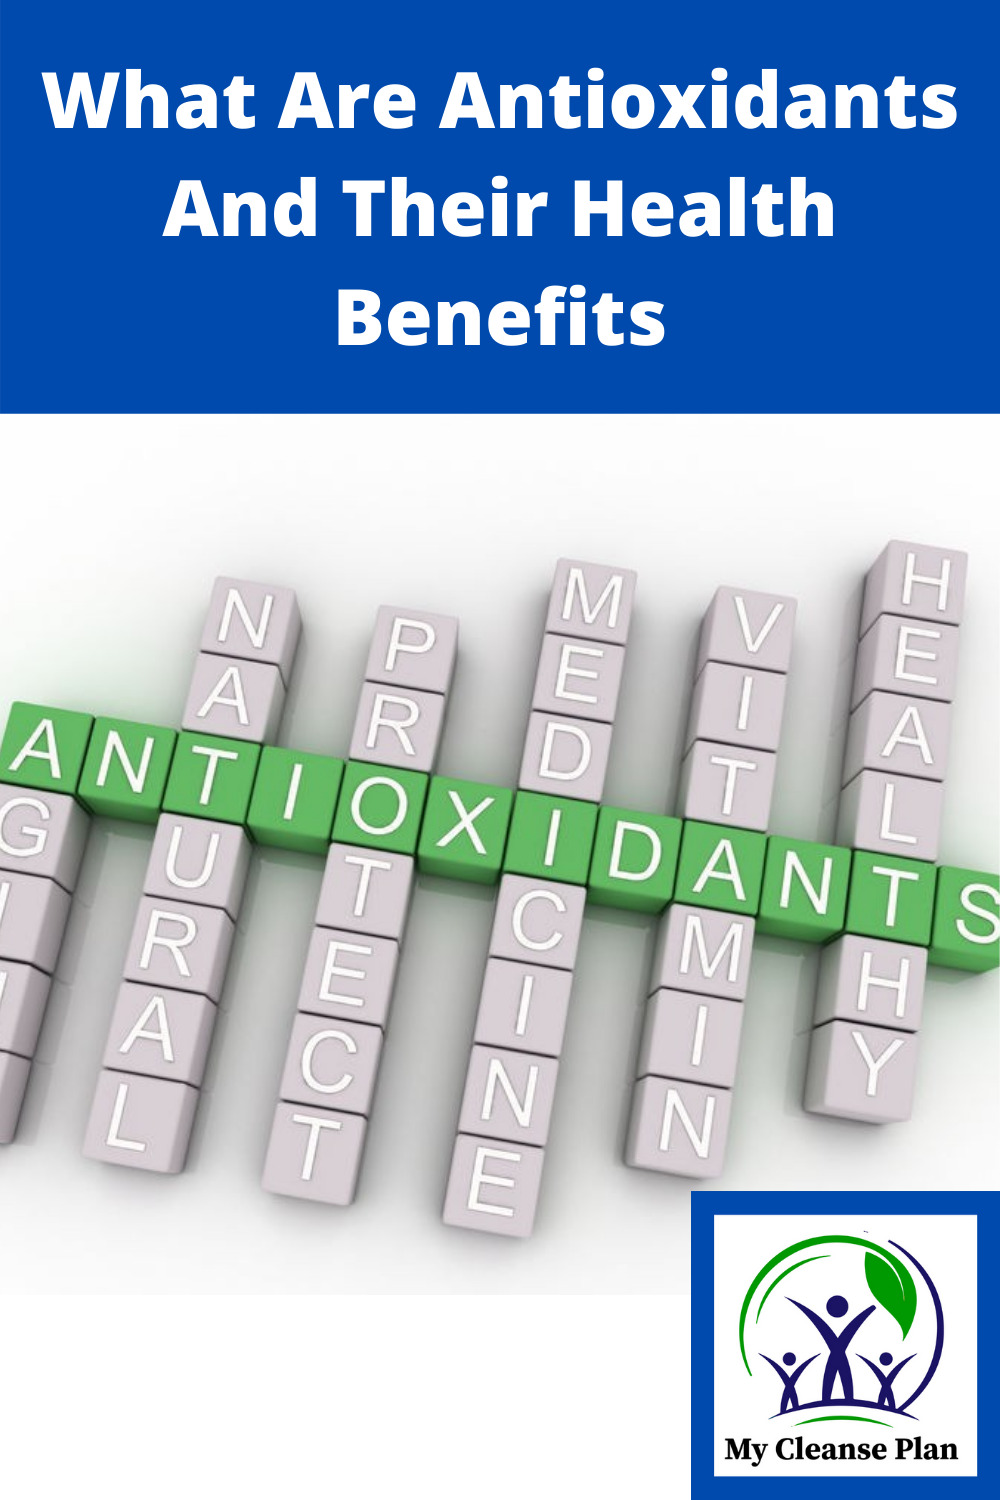 What Are Antioxidants And Their Health Benefits